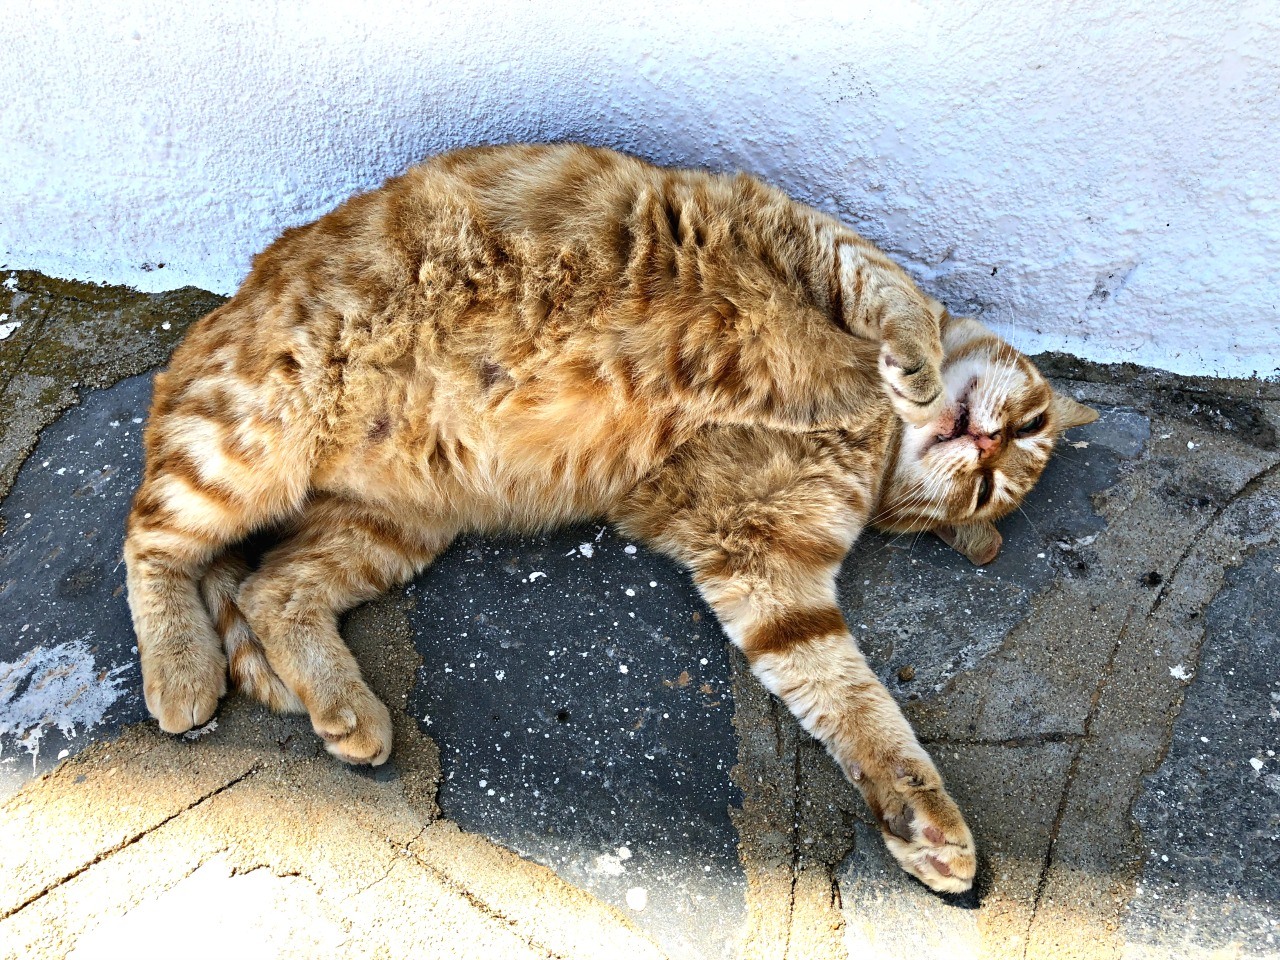 Cats of the Mediterranean